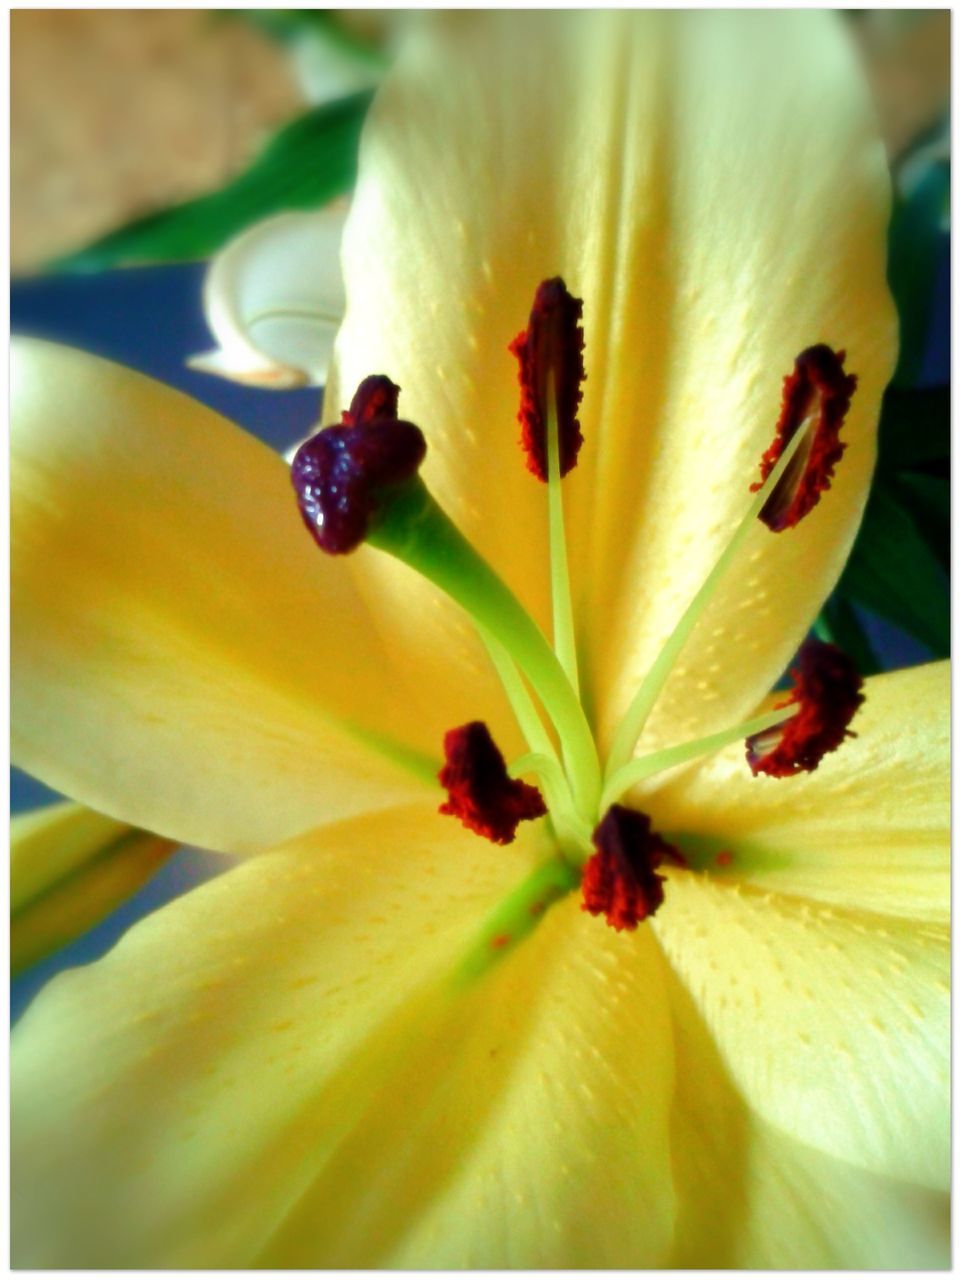 FULL FRAME SHOT OF YELLOW DAY LILY